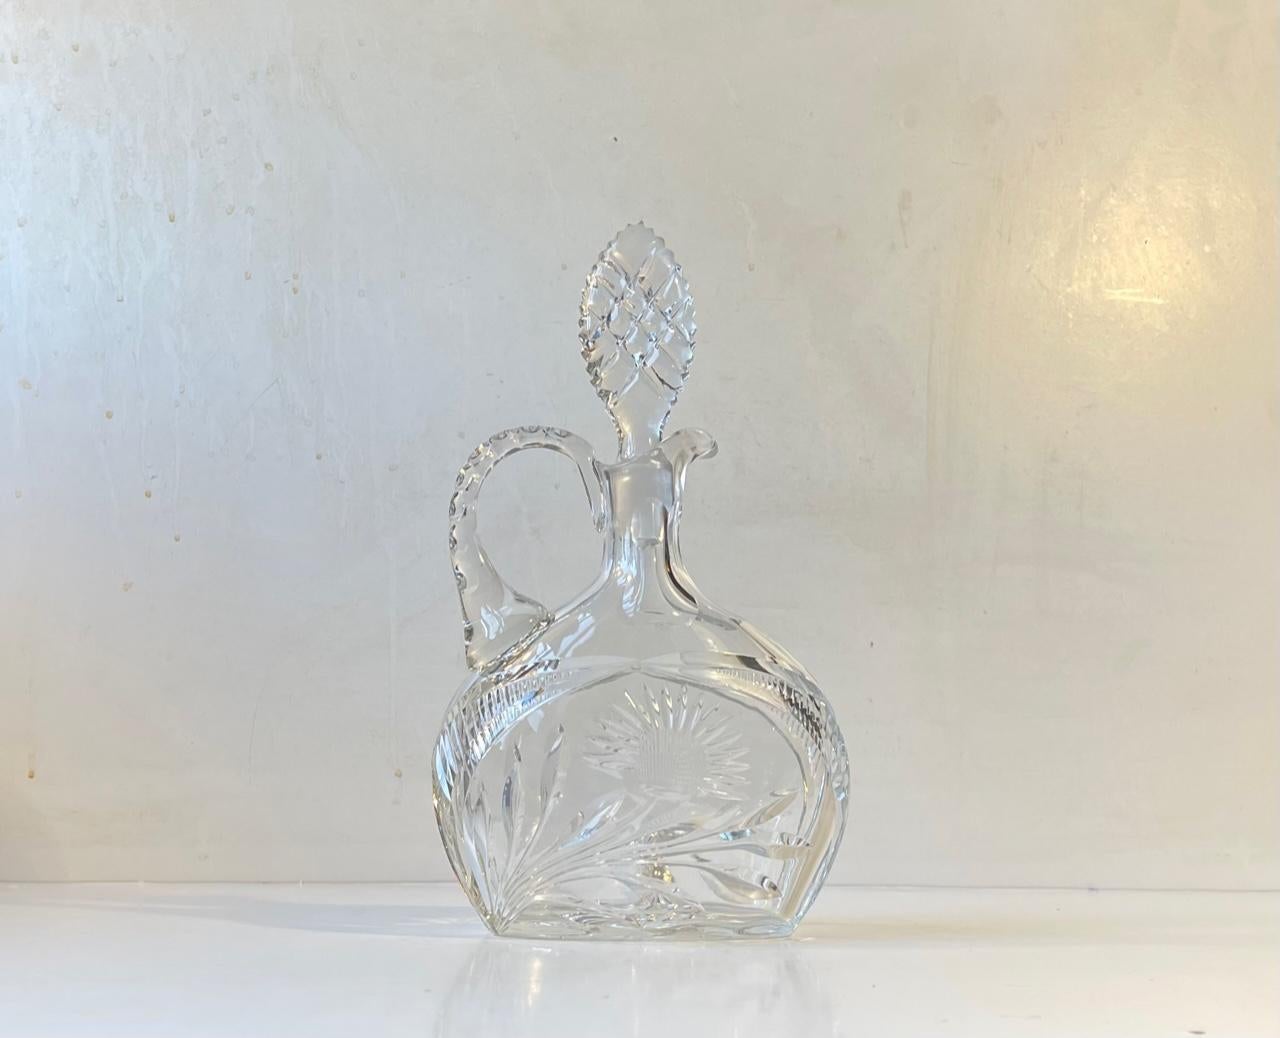 Cristal de Lorraine has an inheritance that goes back all the way to 1764. They have created crystal ware for names like Hermés, Cartier and St Dupont. This wine decanter dates to the 1950s or 60s. 'No stones are left unturned' and its many cut